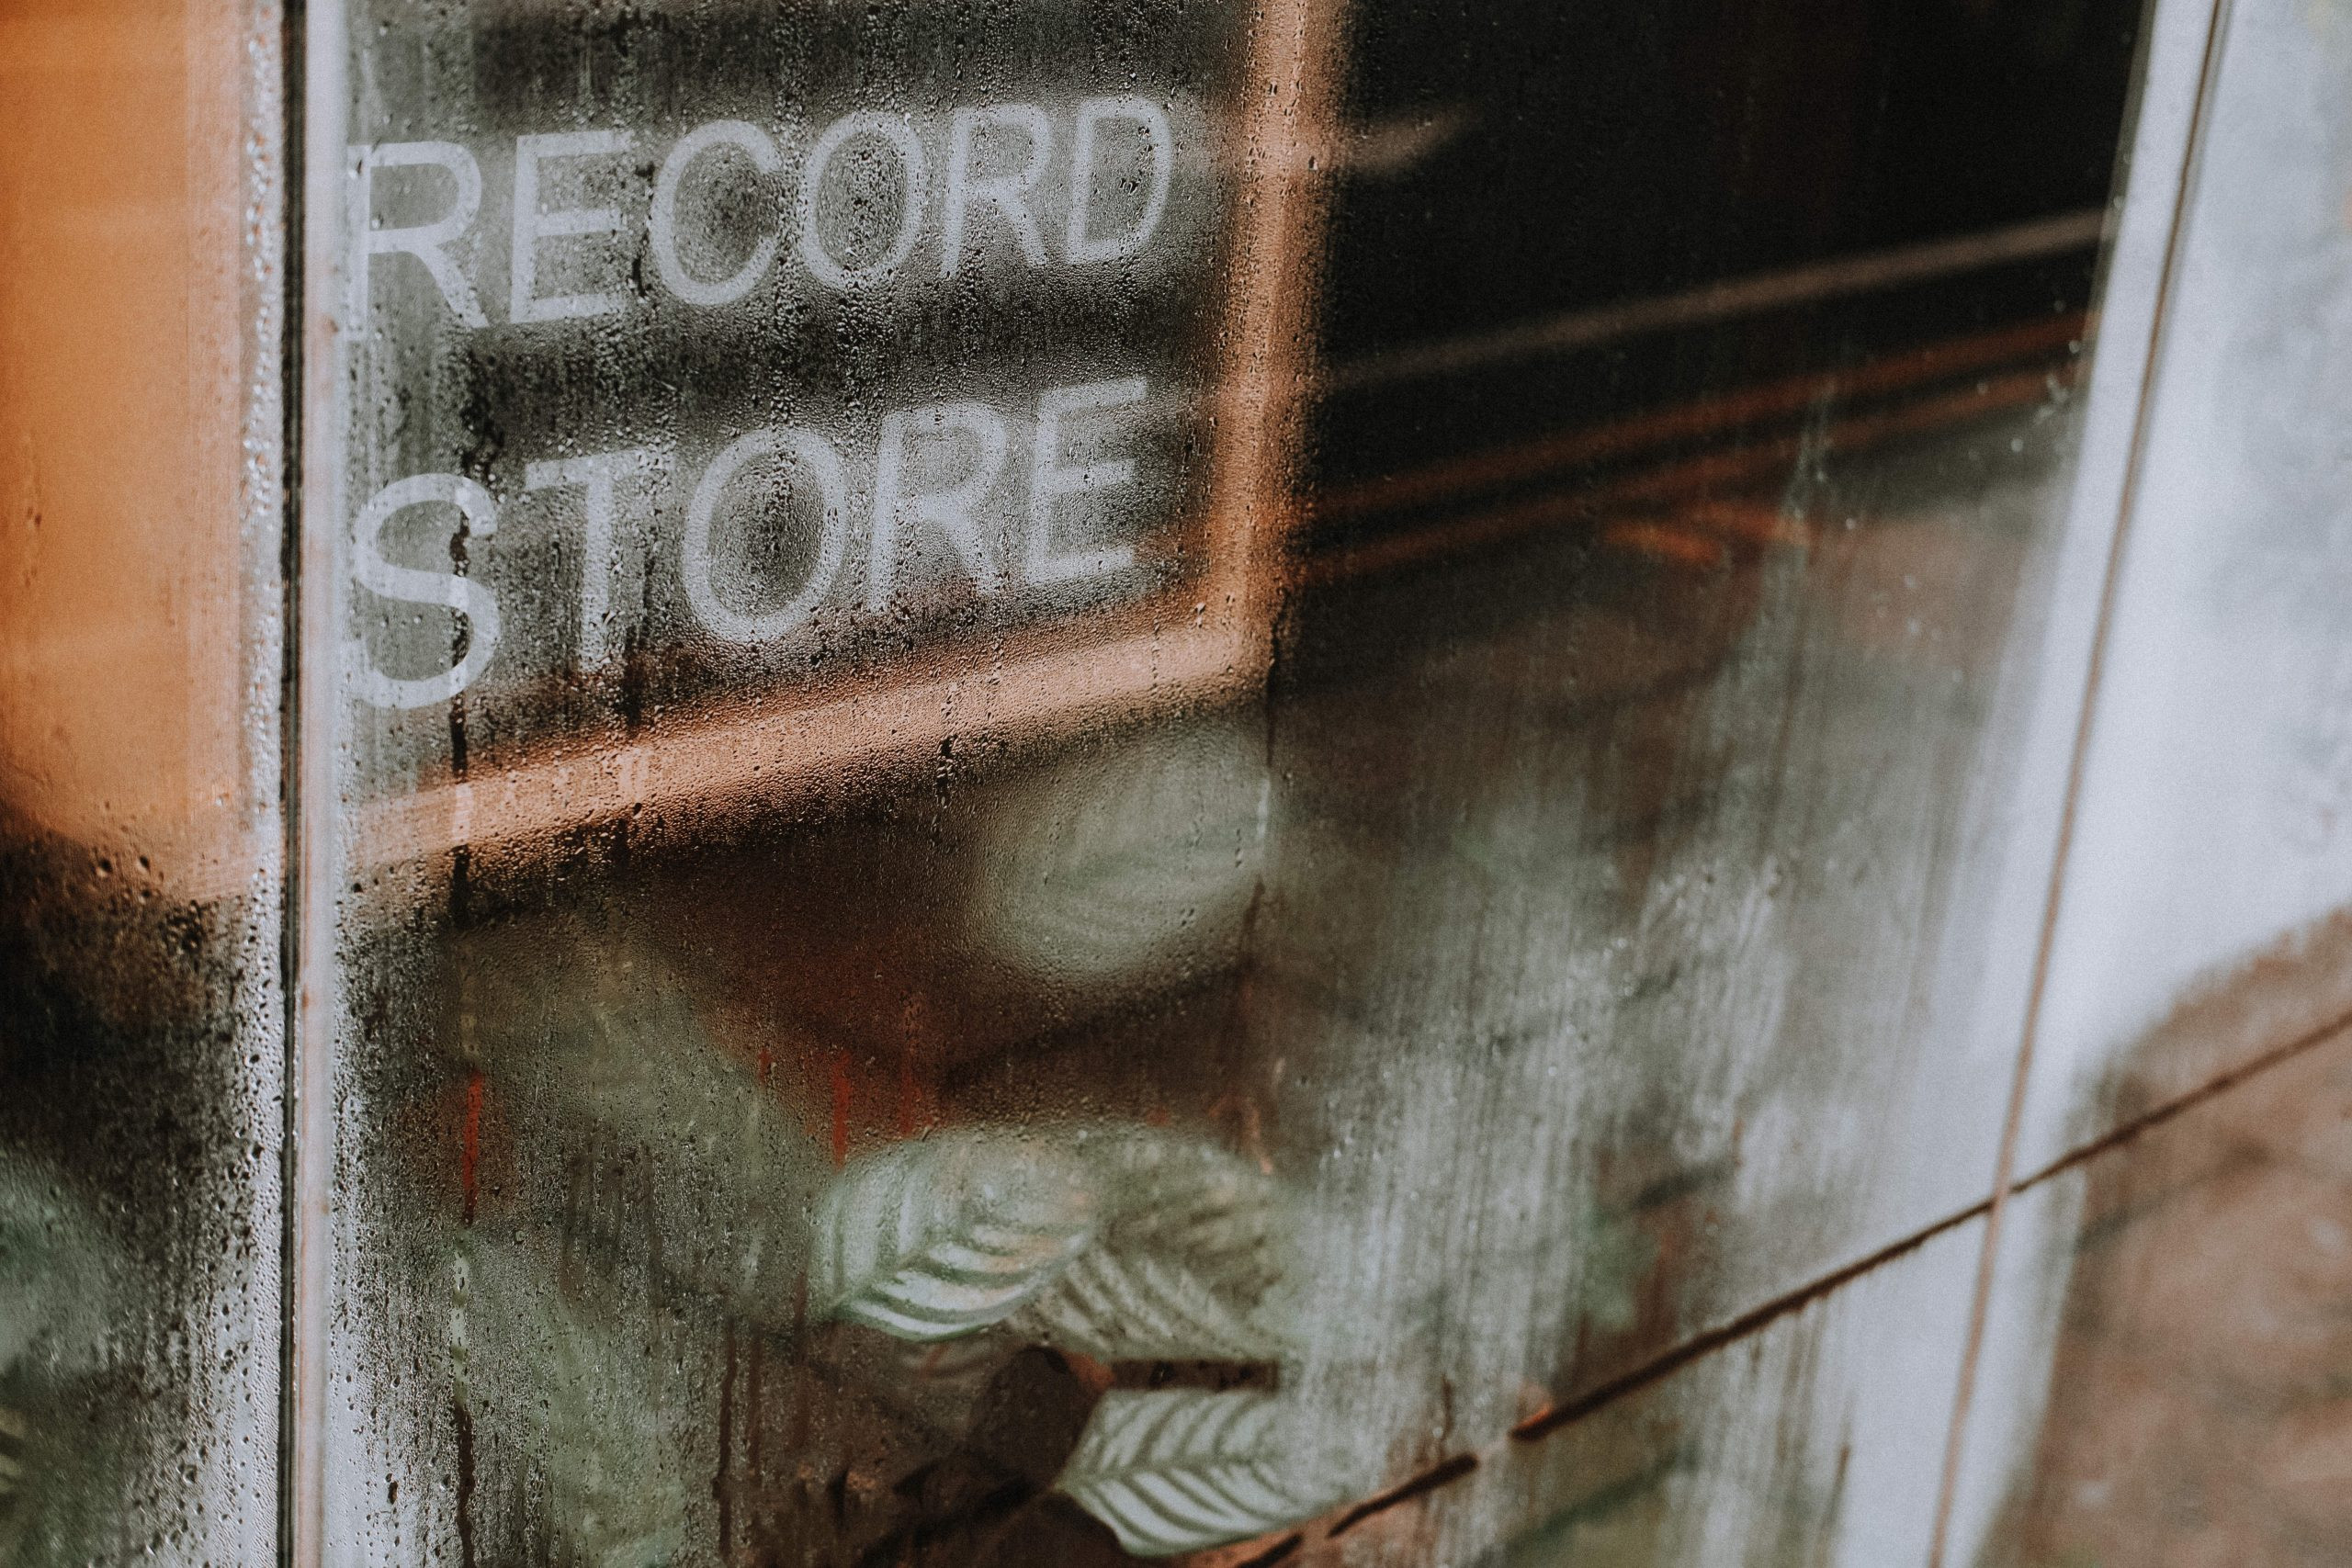 record store window for streaming duistribution